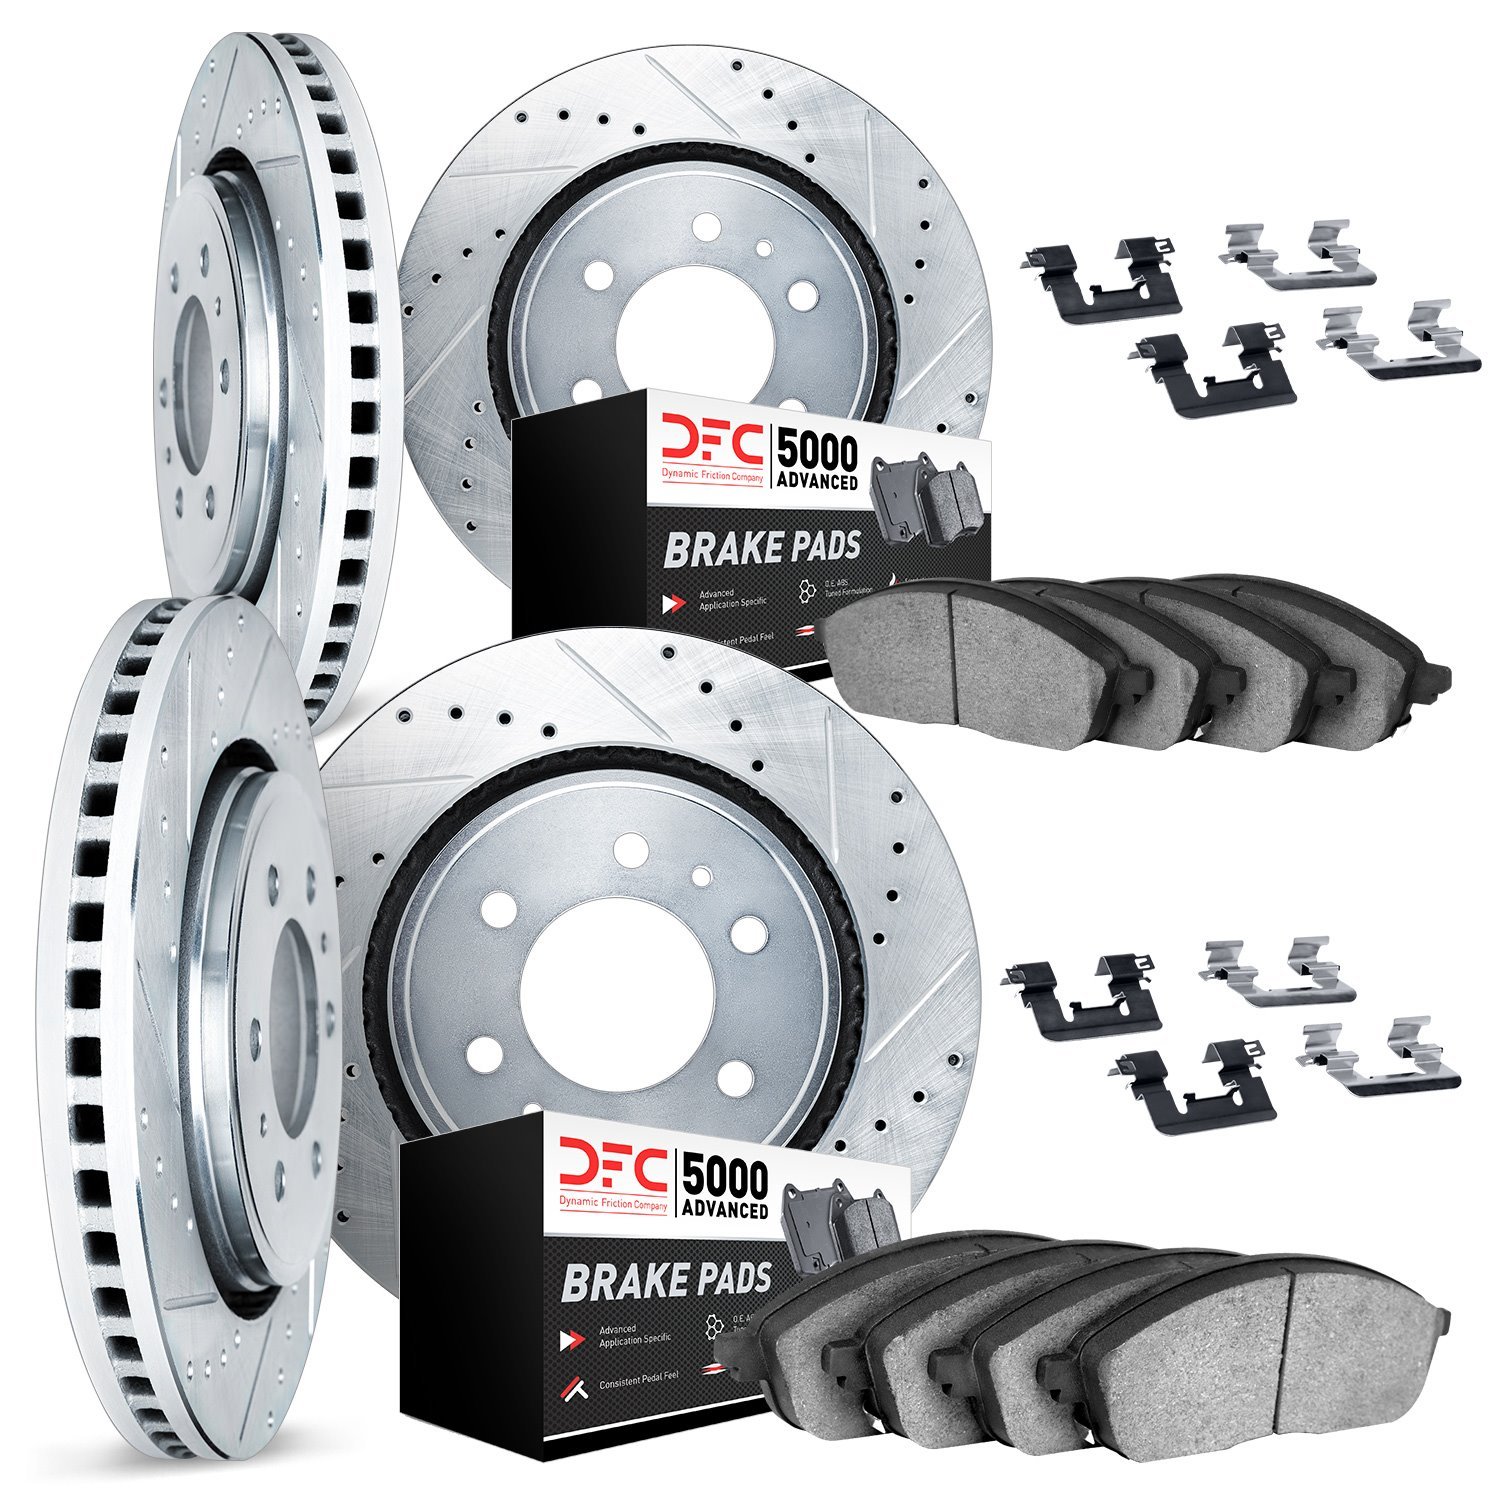 7514-67070 Drilled/Slotted Brake Rotors w/5000 Advanced Brake Pads Kit & Hardware [Silver], Fits Select Infiniti/Nissan, Positio